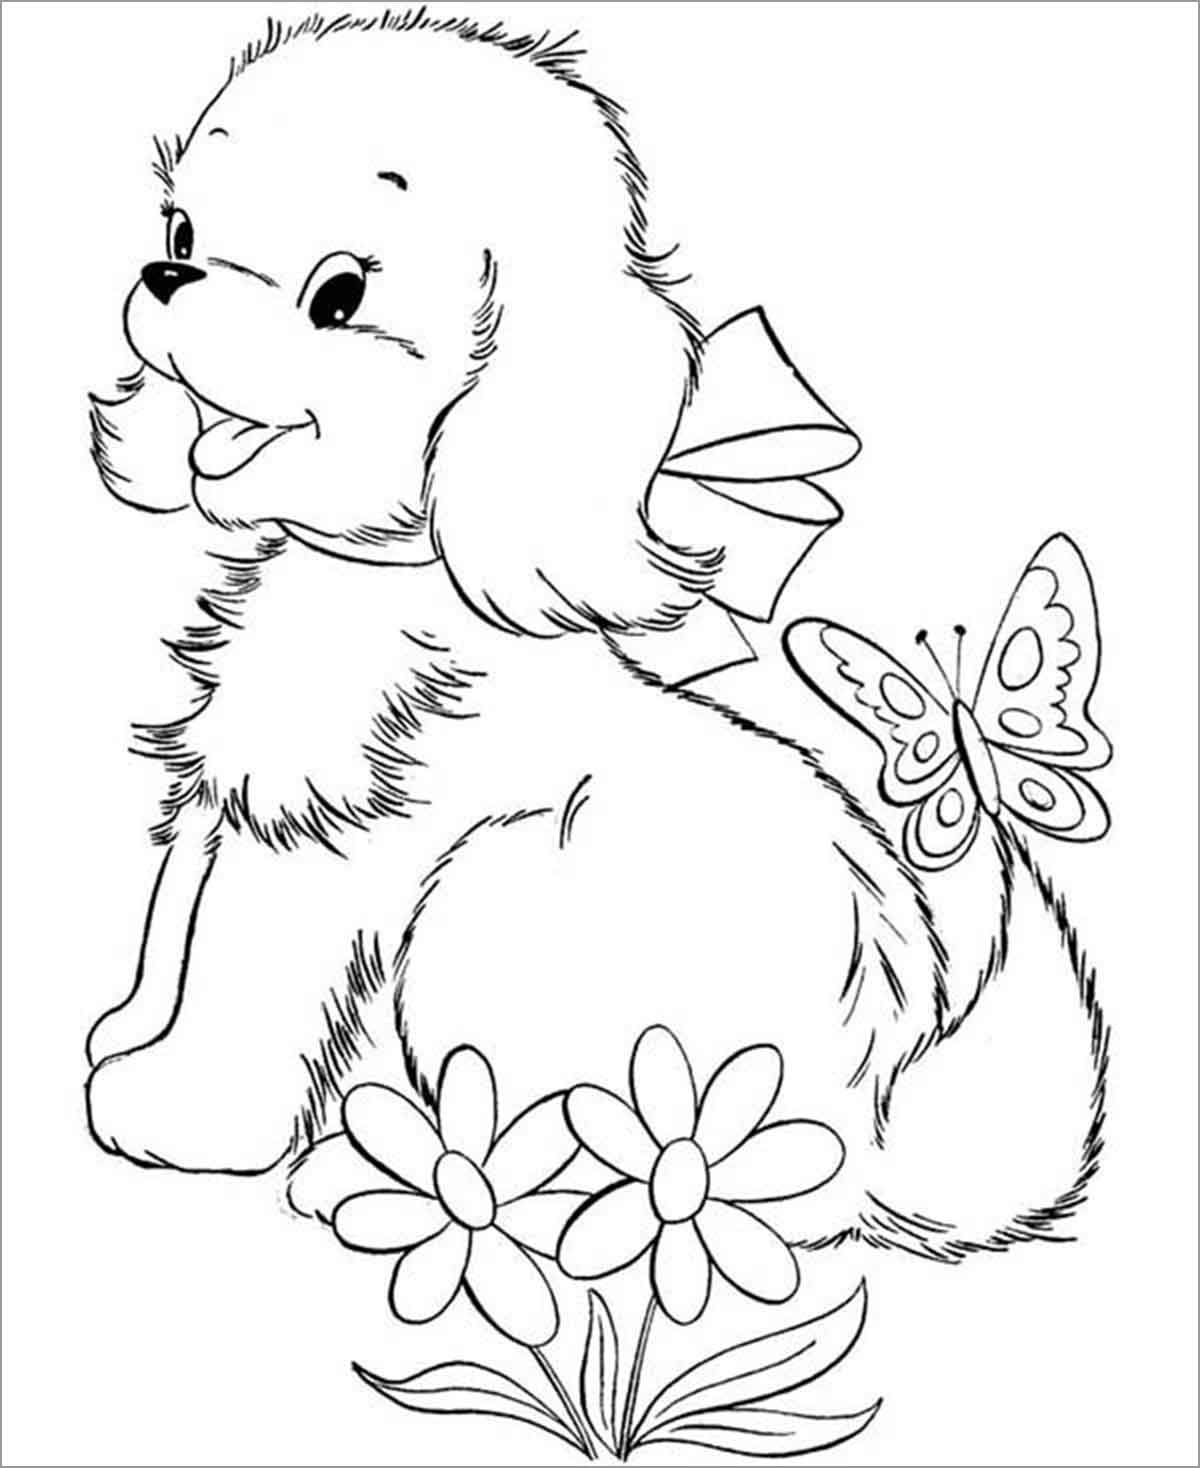 Dog and Butterfly Coloring Page